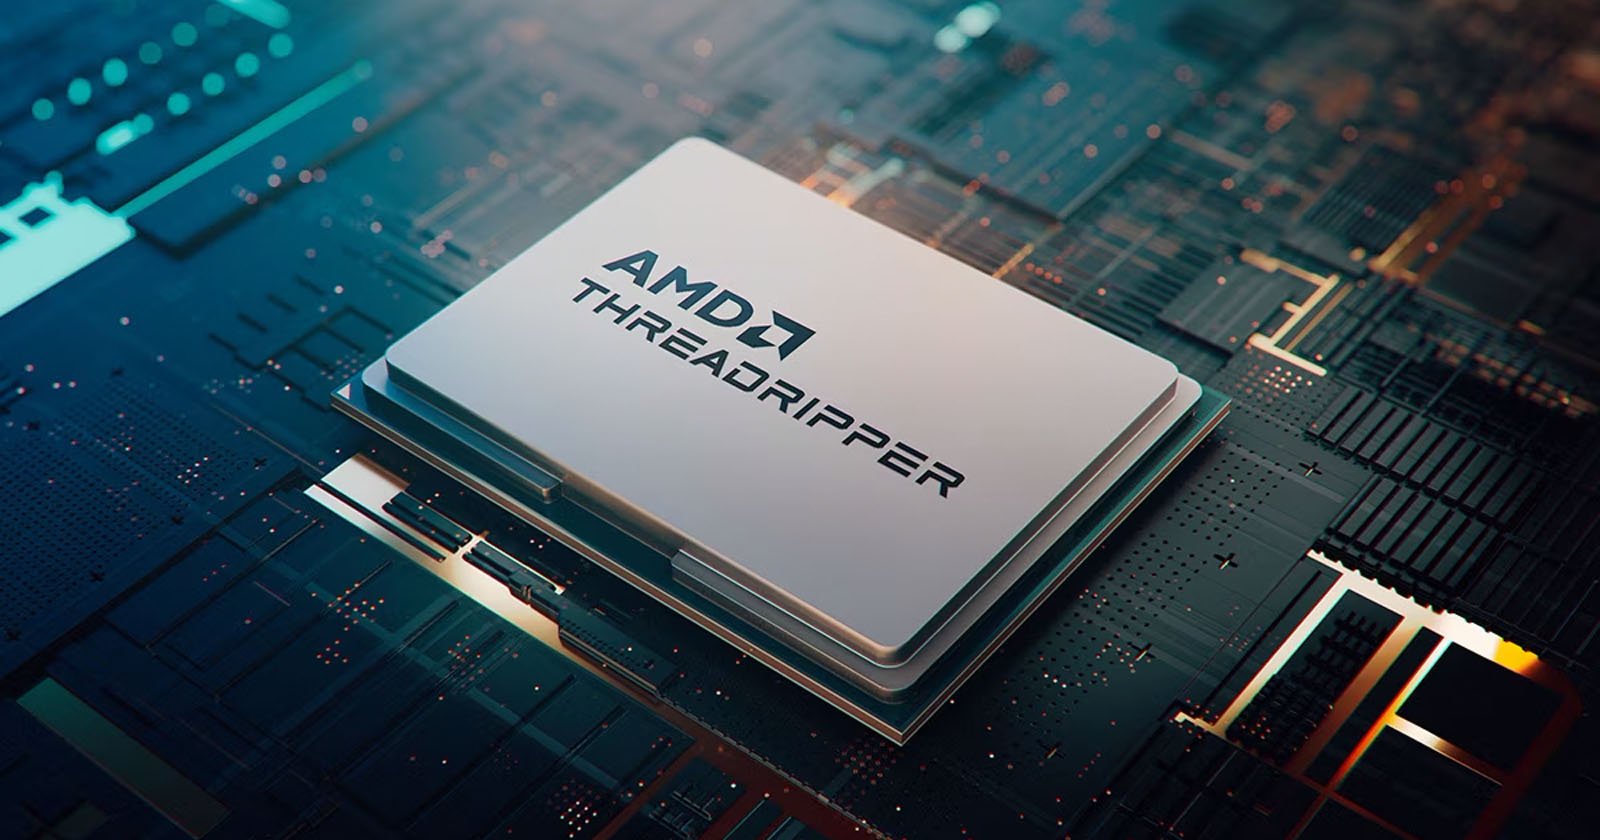  amd launches threadripper cpus workstations including 96-core 